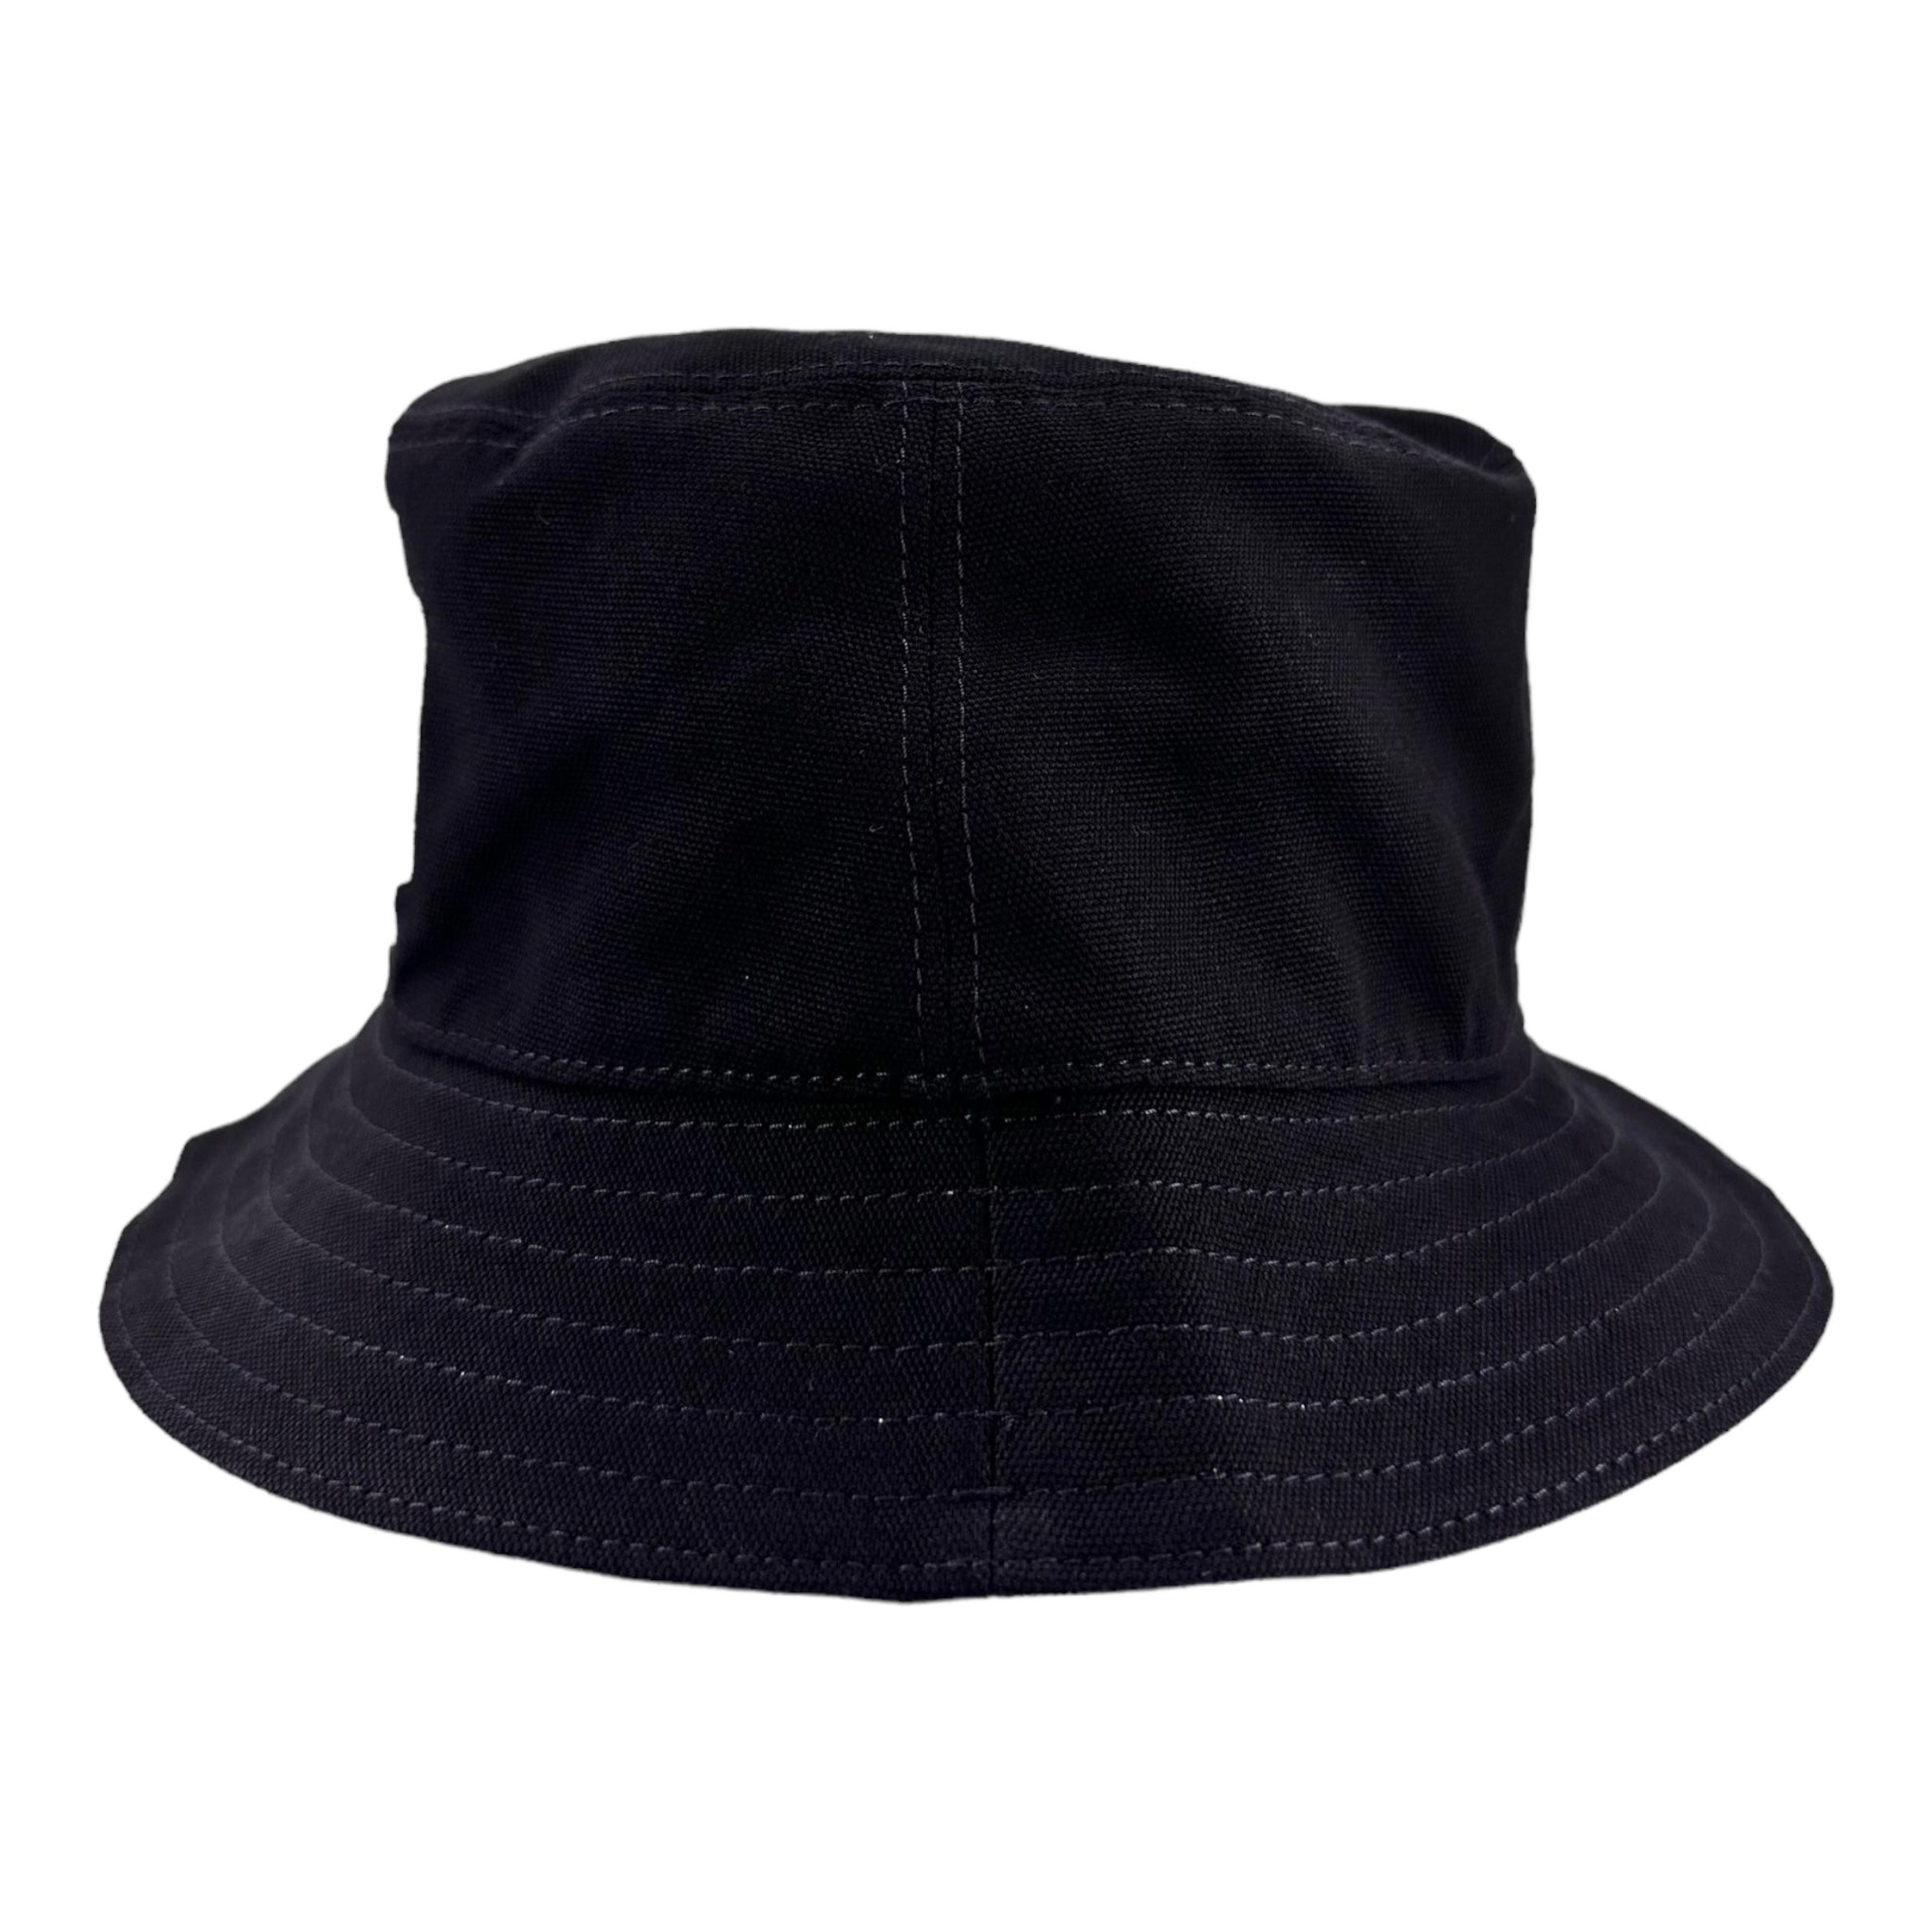 Alternate View 3 of Dior Couture Bucket Hat Black Pre-Owned